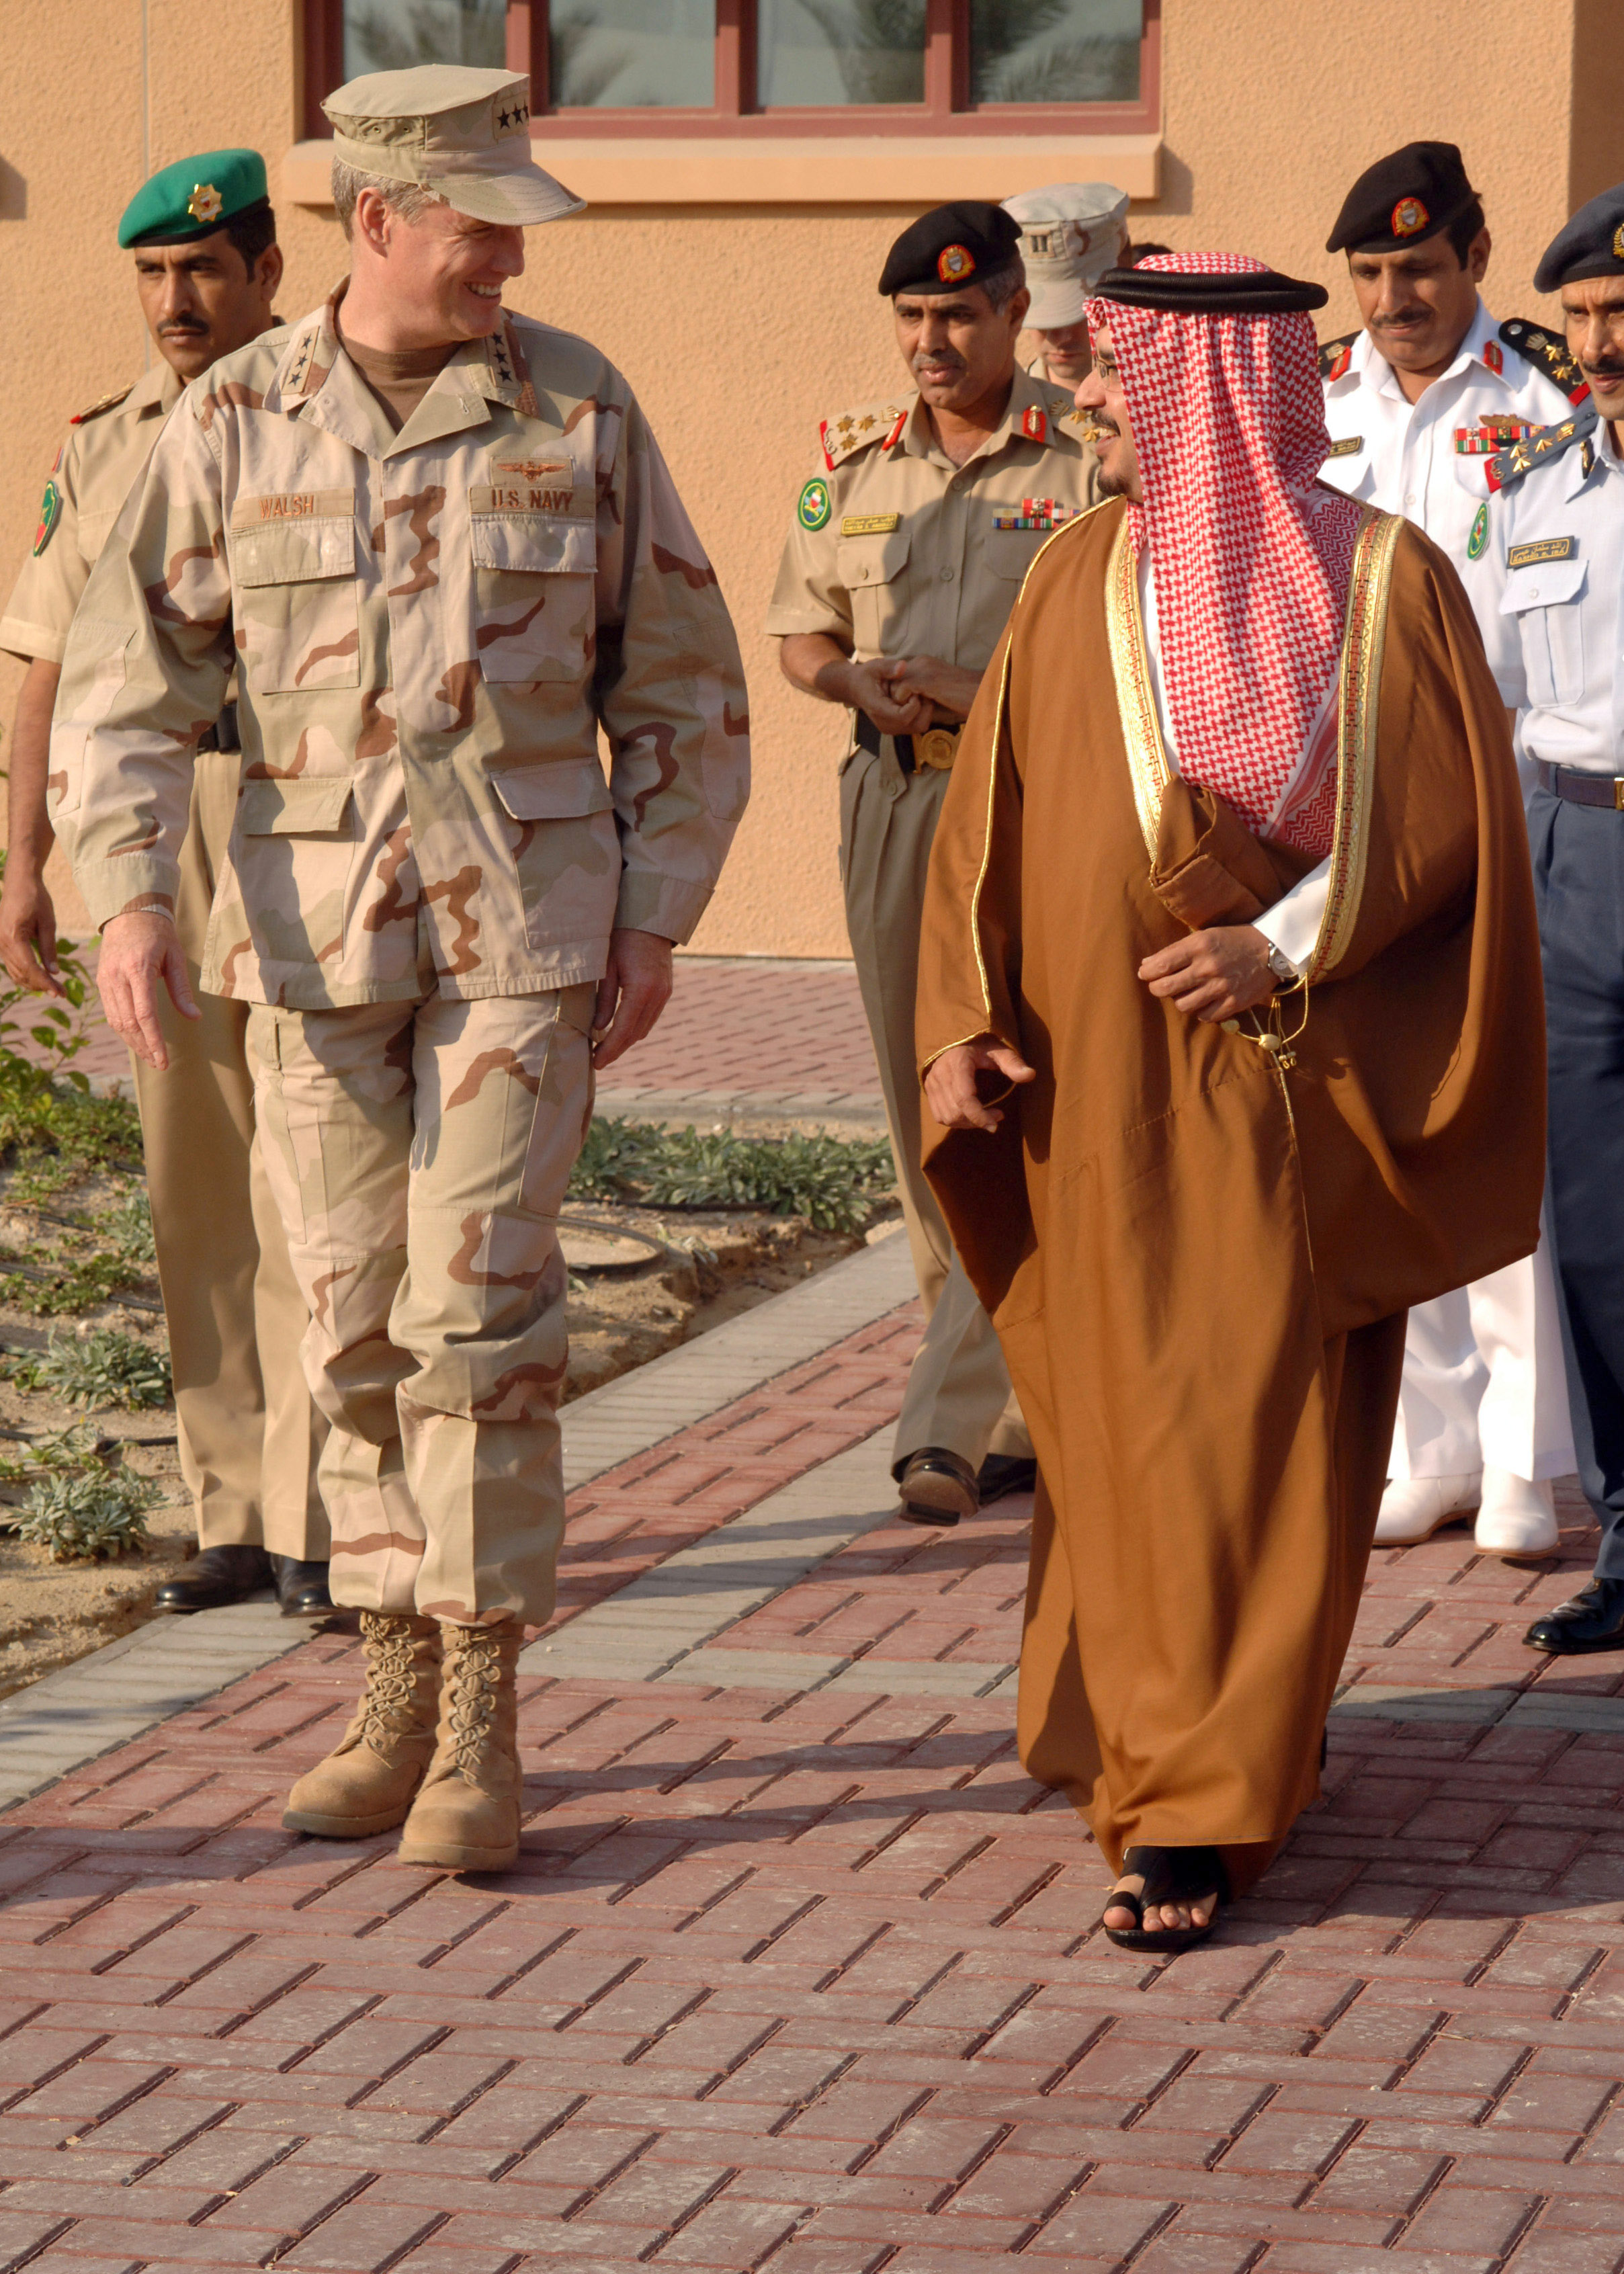 061128-N-0448N-002 Manama, Bahrain (Nov. 28, 2006) Ð U.S. Naval Forces Central Command and U.S. 5th Fleet Commander, Vice Adm. Patrick Walsh, tours Naval Support Activity Bahrain with BahrainÕs Crown Prince, His Highness Shaikh Salman bin Hamad bin Isa Al-Khalifa. Walsh hosted a visit with the Prince, during which they discussed the NavyÕs role in the Middle East as well as bilateral relations between the U.S. military and the country of Bahrain. U.S. Navy photo by Mass Communication Specialist 2nd Class Bobby Northnagle (RELEASED)